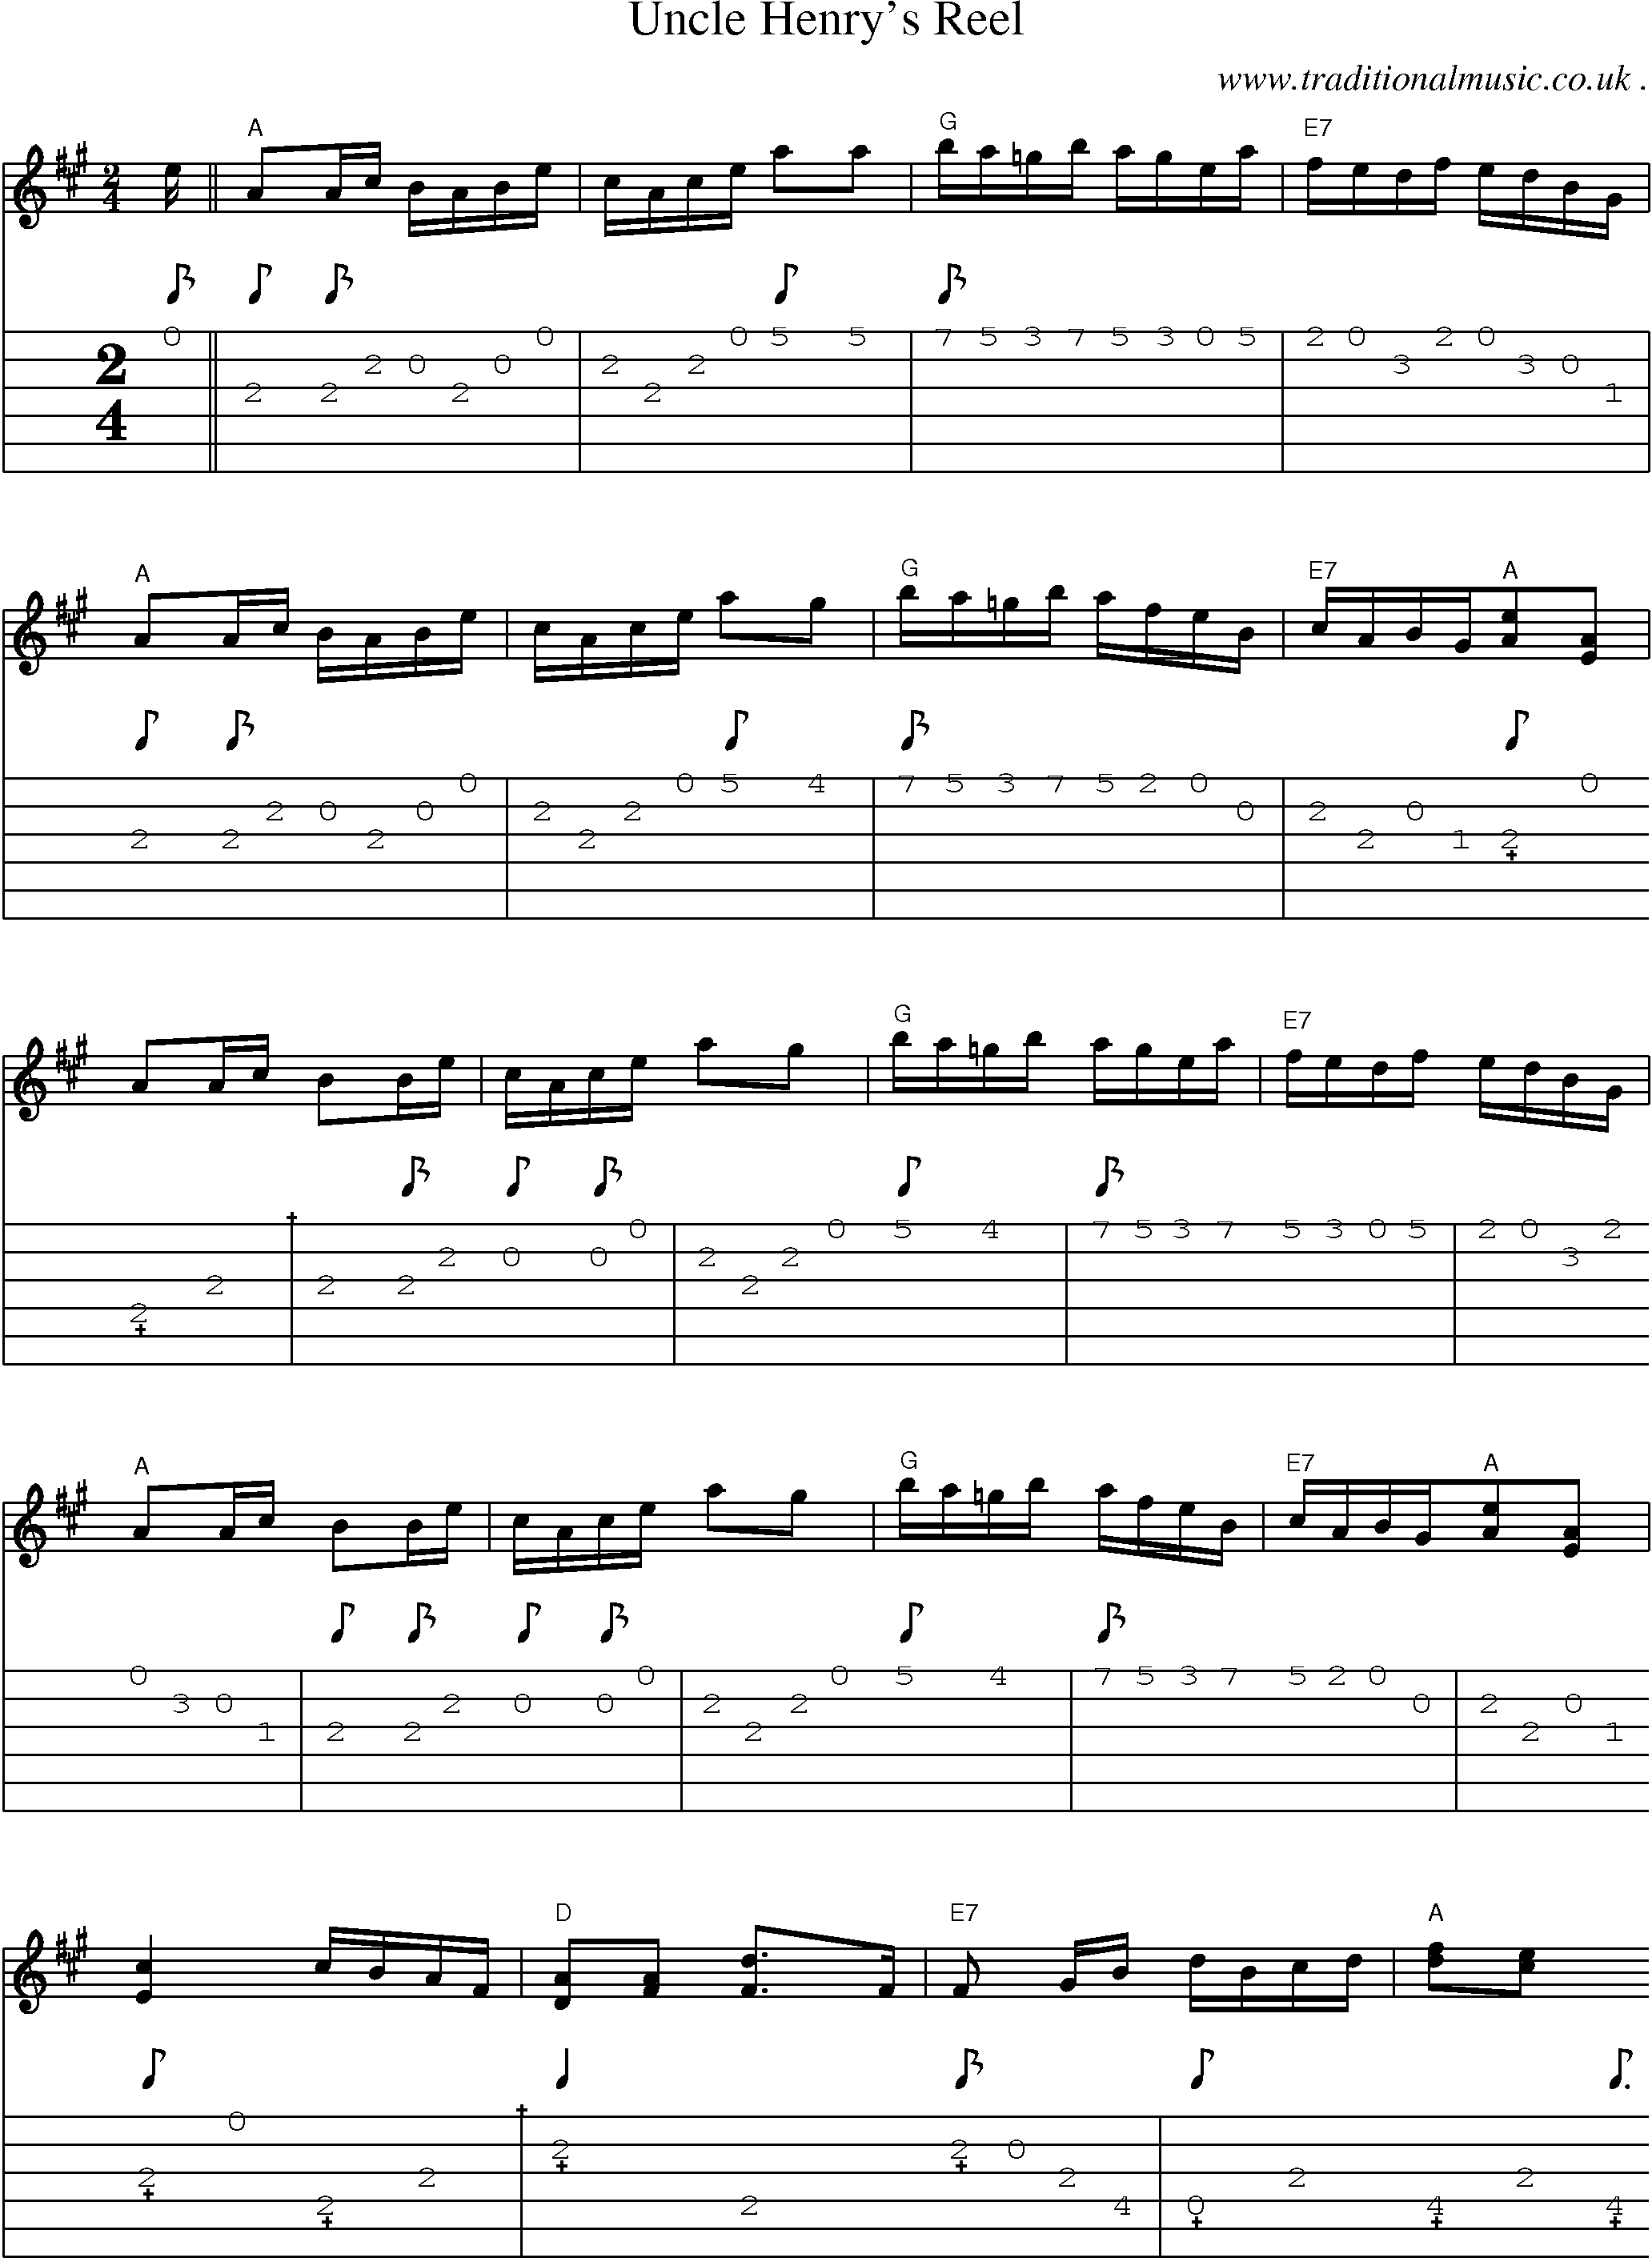 Sheet-Music and Guitar Tabs for Uncle Henrys Reel